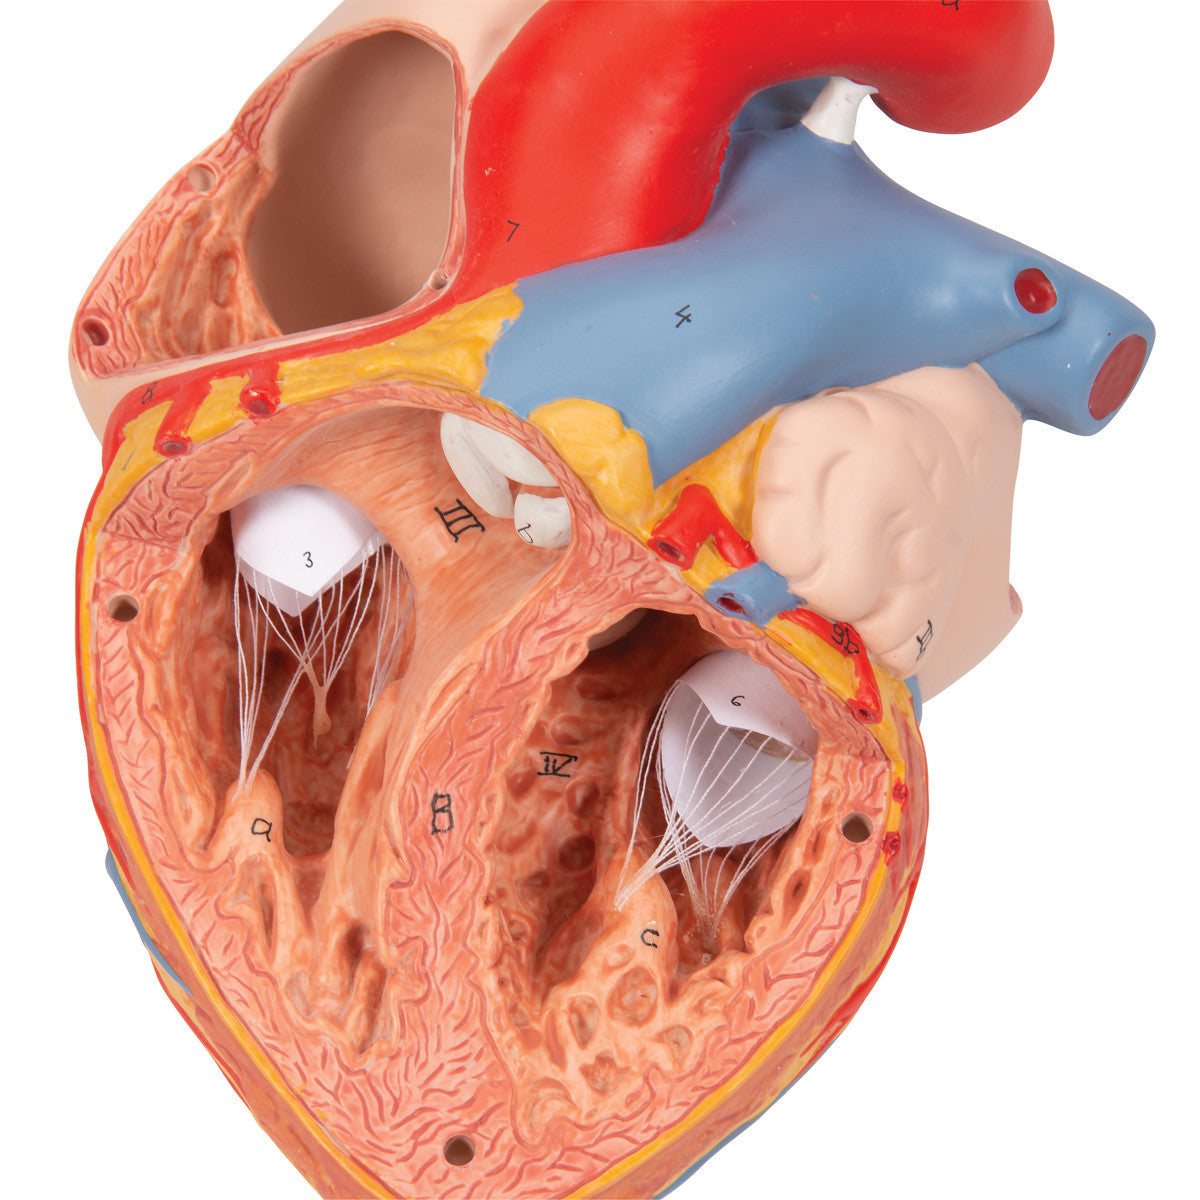 Giant Heart with Esophagus and Trachea | 3B Scientific G13